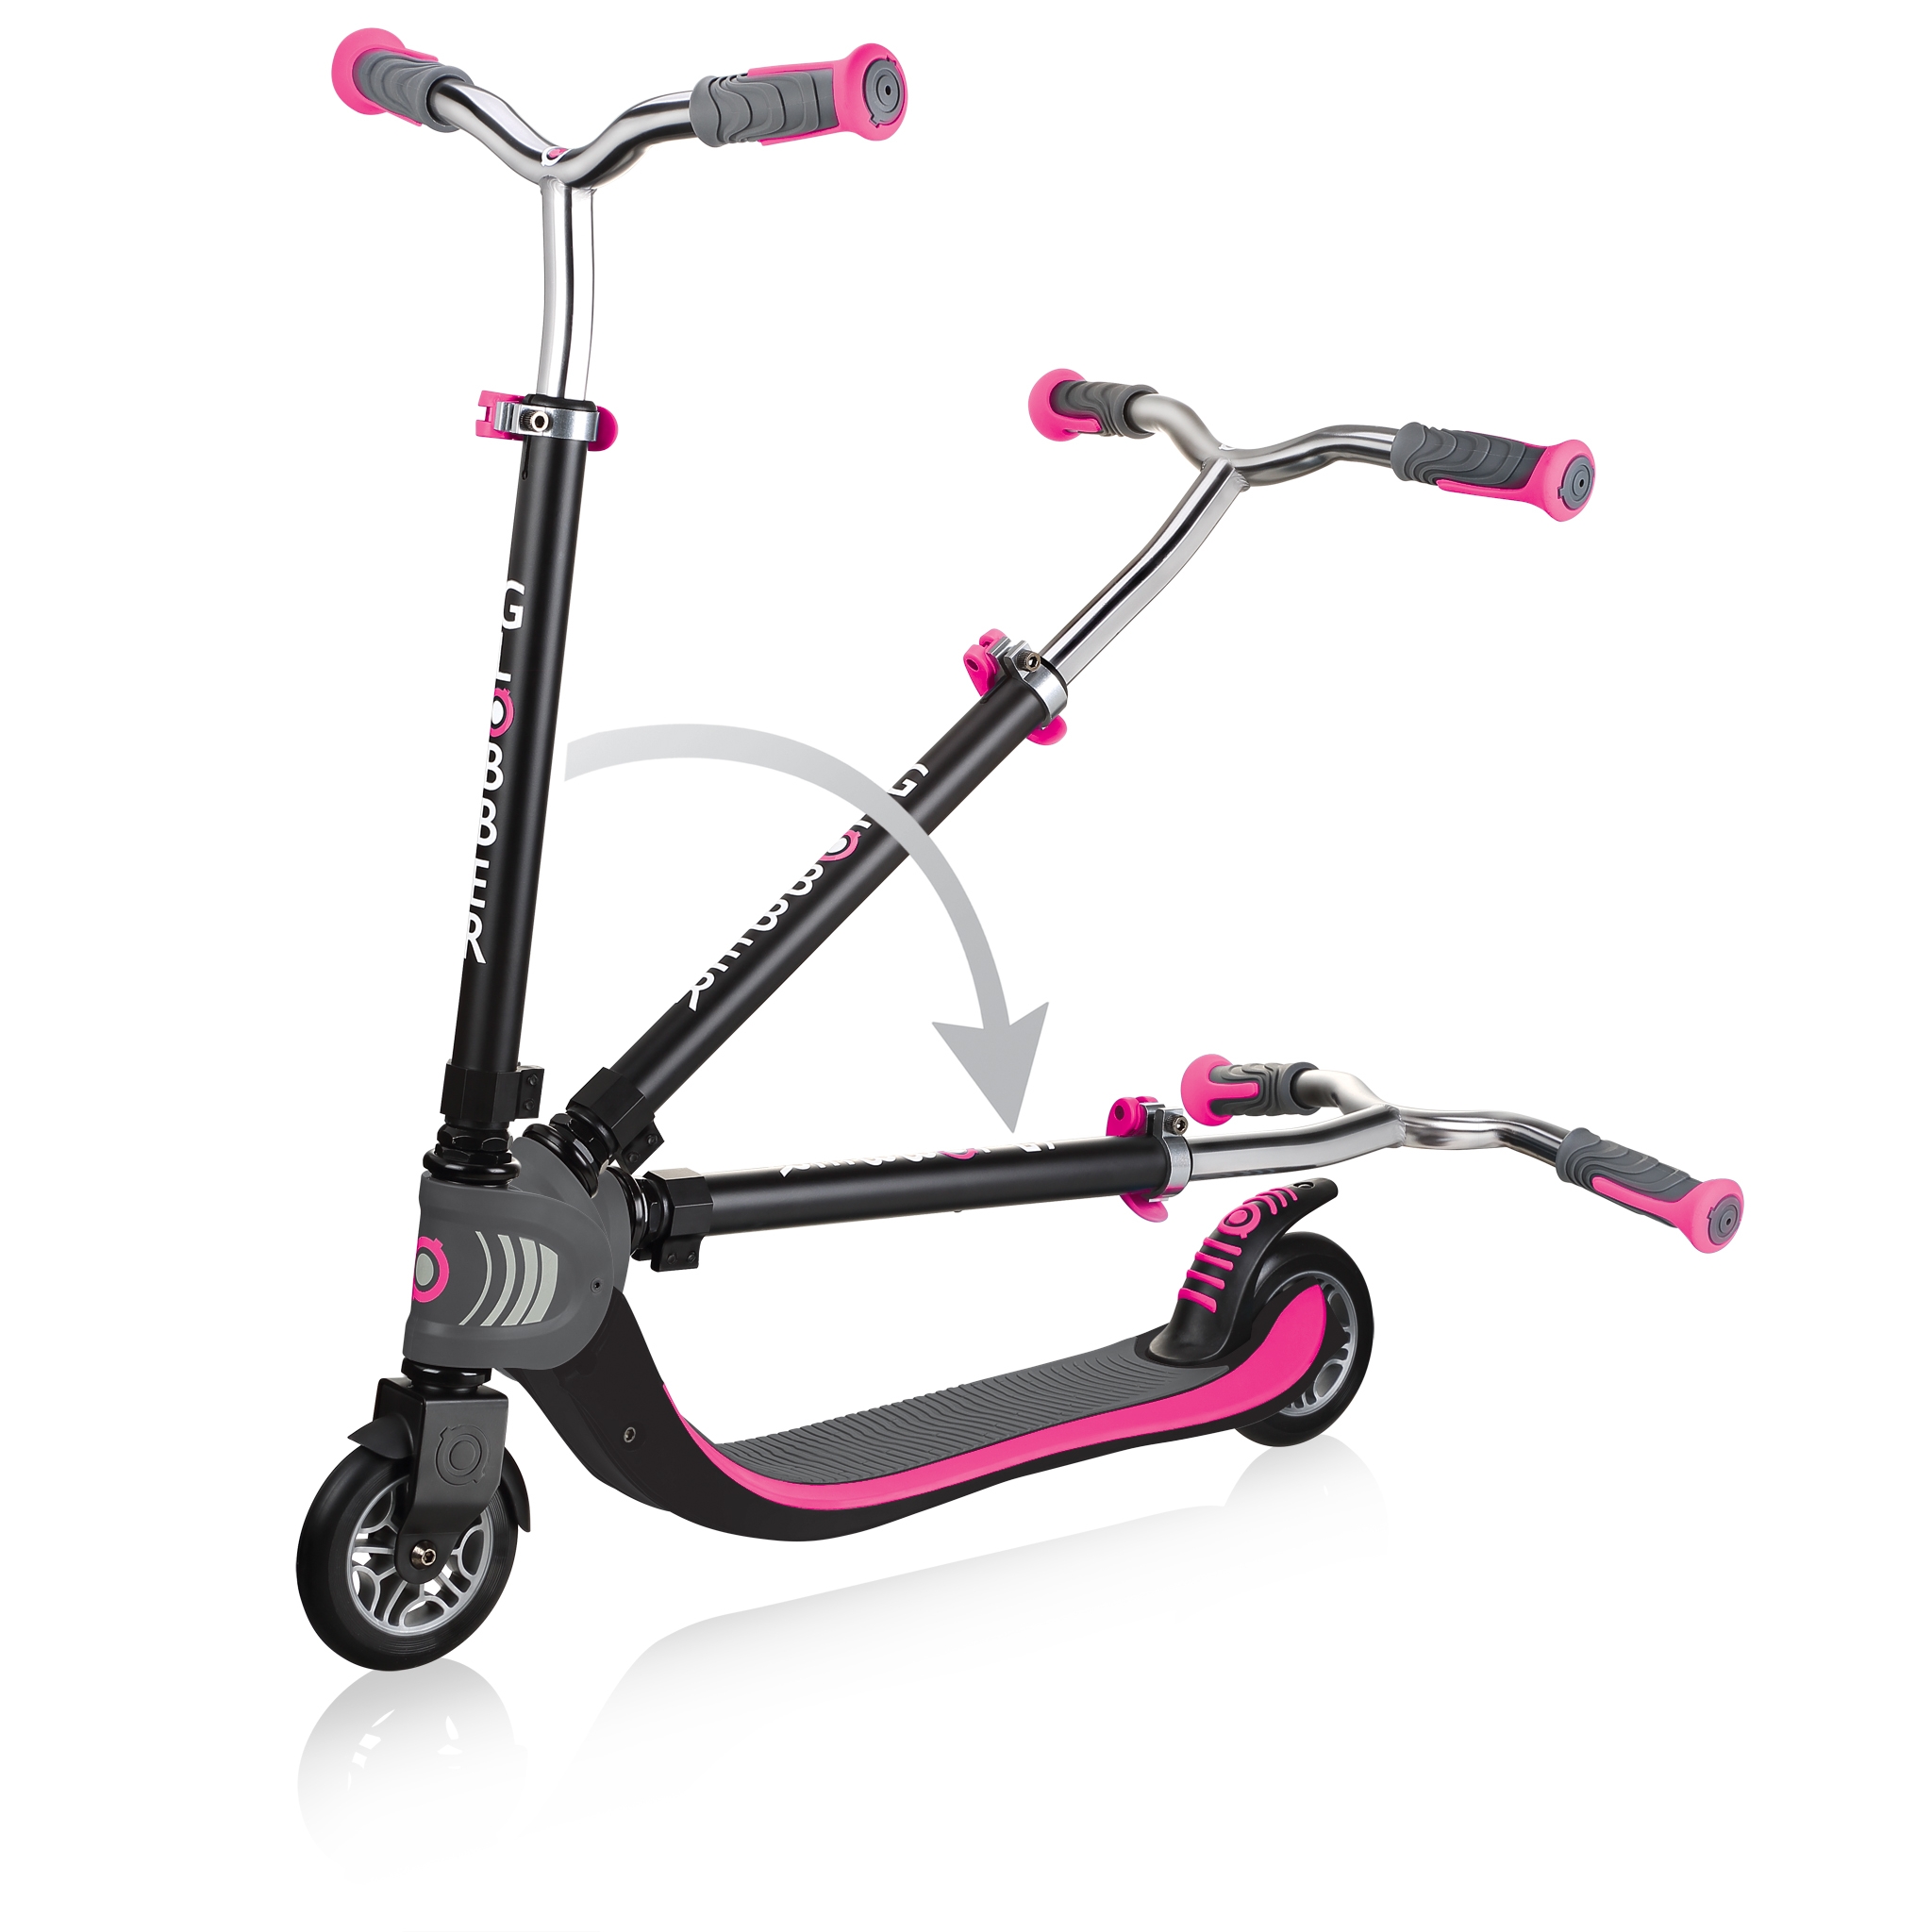 FLOW-FOLDABLE-125-2-wheel-folding-scooter-for-kids-deep-pink 3